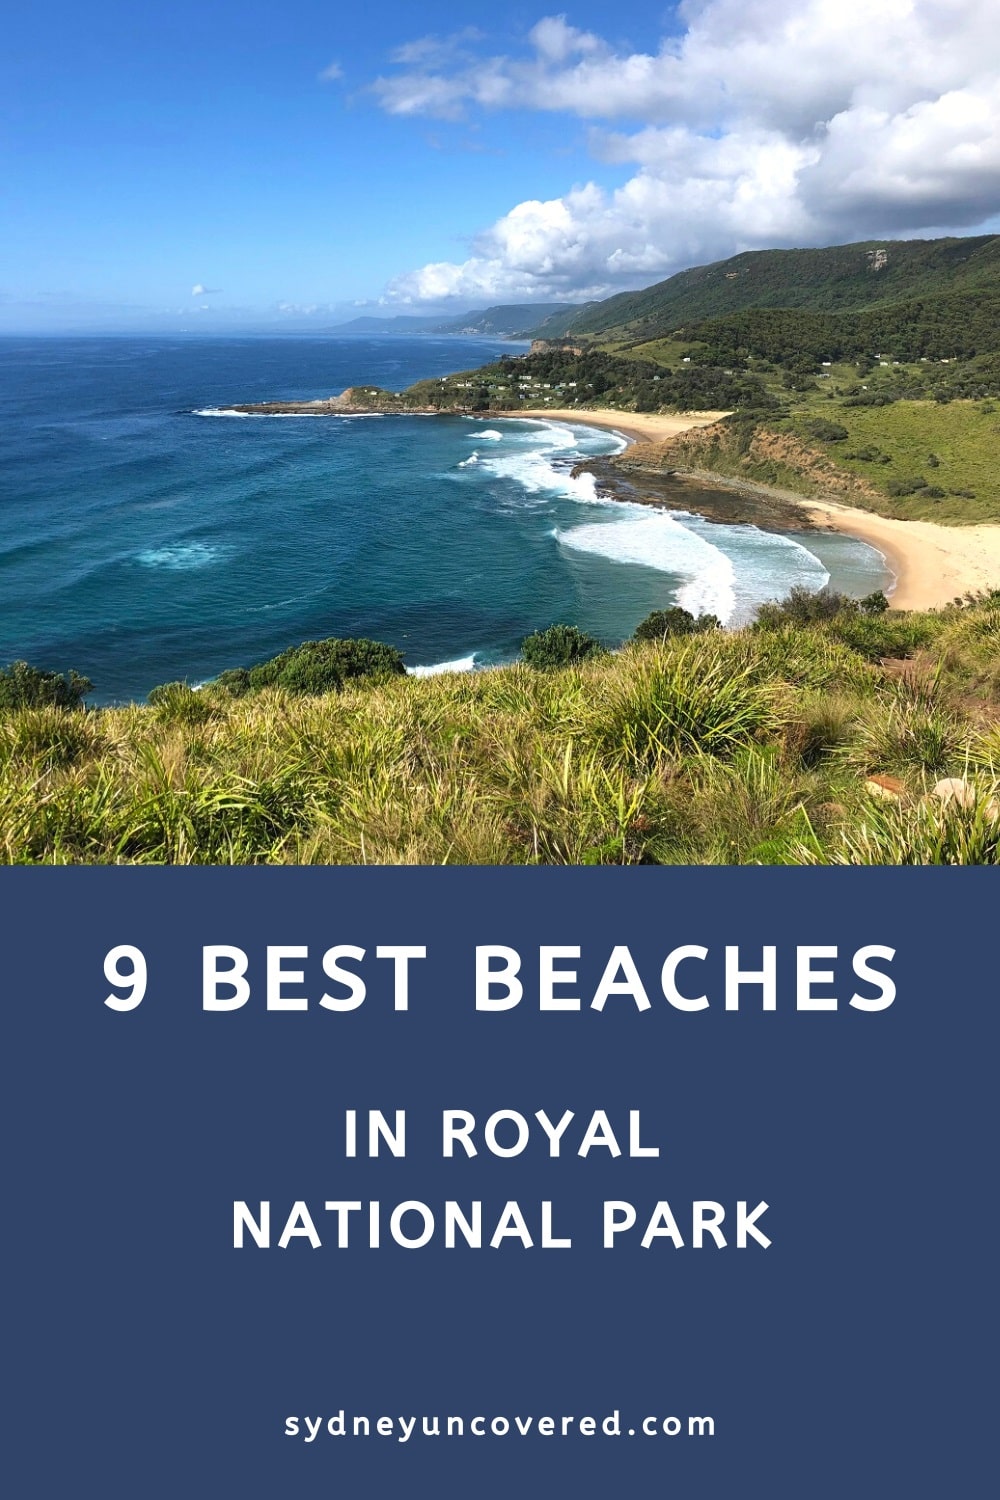 9 Best beaches in Royal National Park